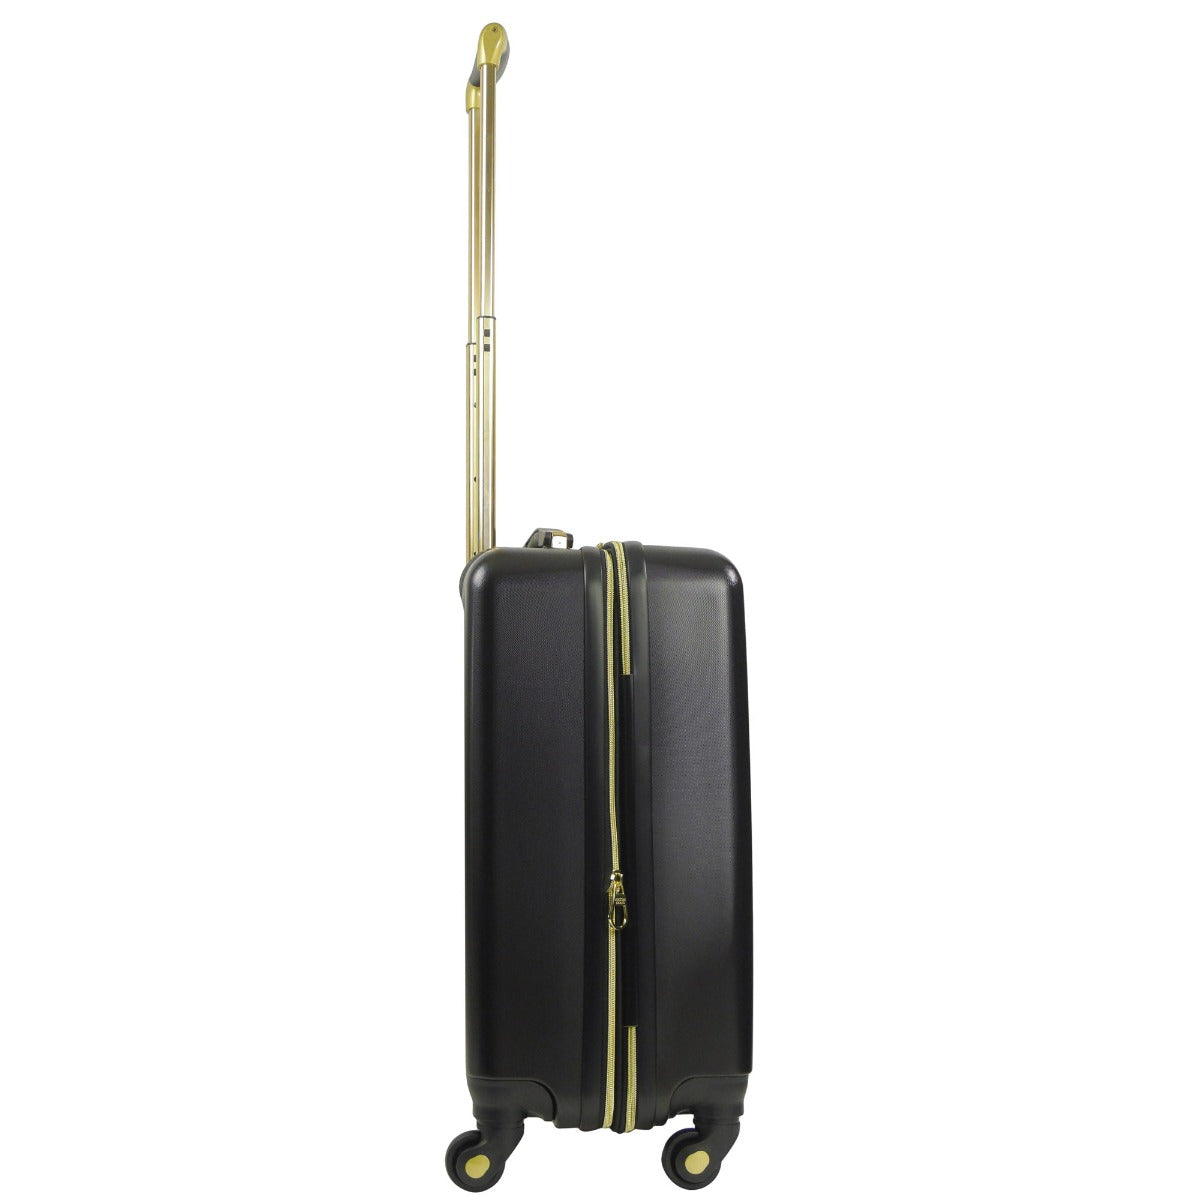 Ful Christian Serrano Addie 22" hardside spinner suitcase luggage black - carry on suitcases for travelling